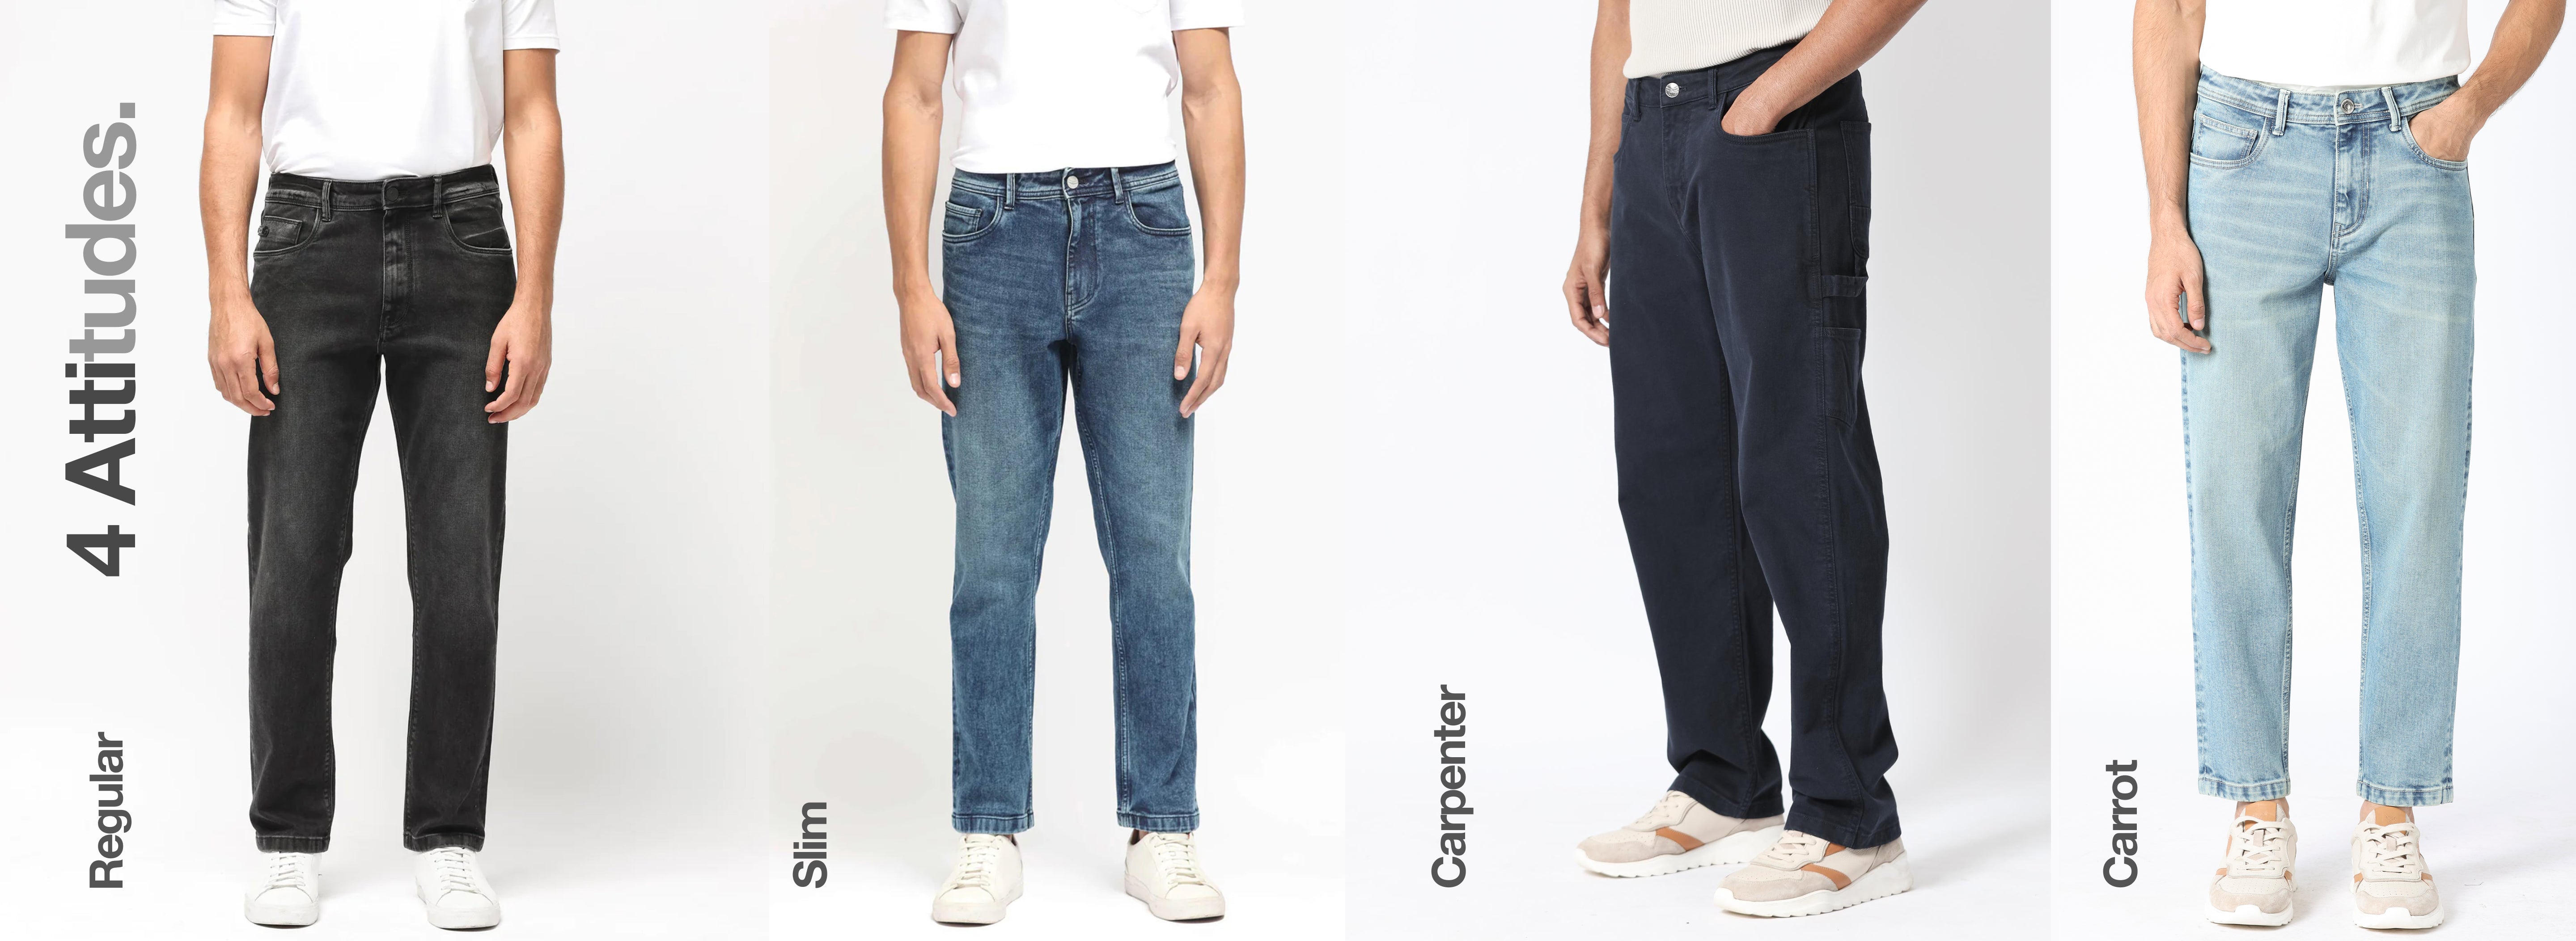 What color jeans goes with a charcoal black shirt? - Quora